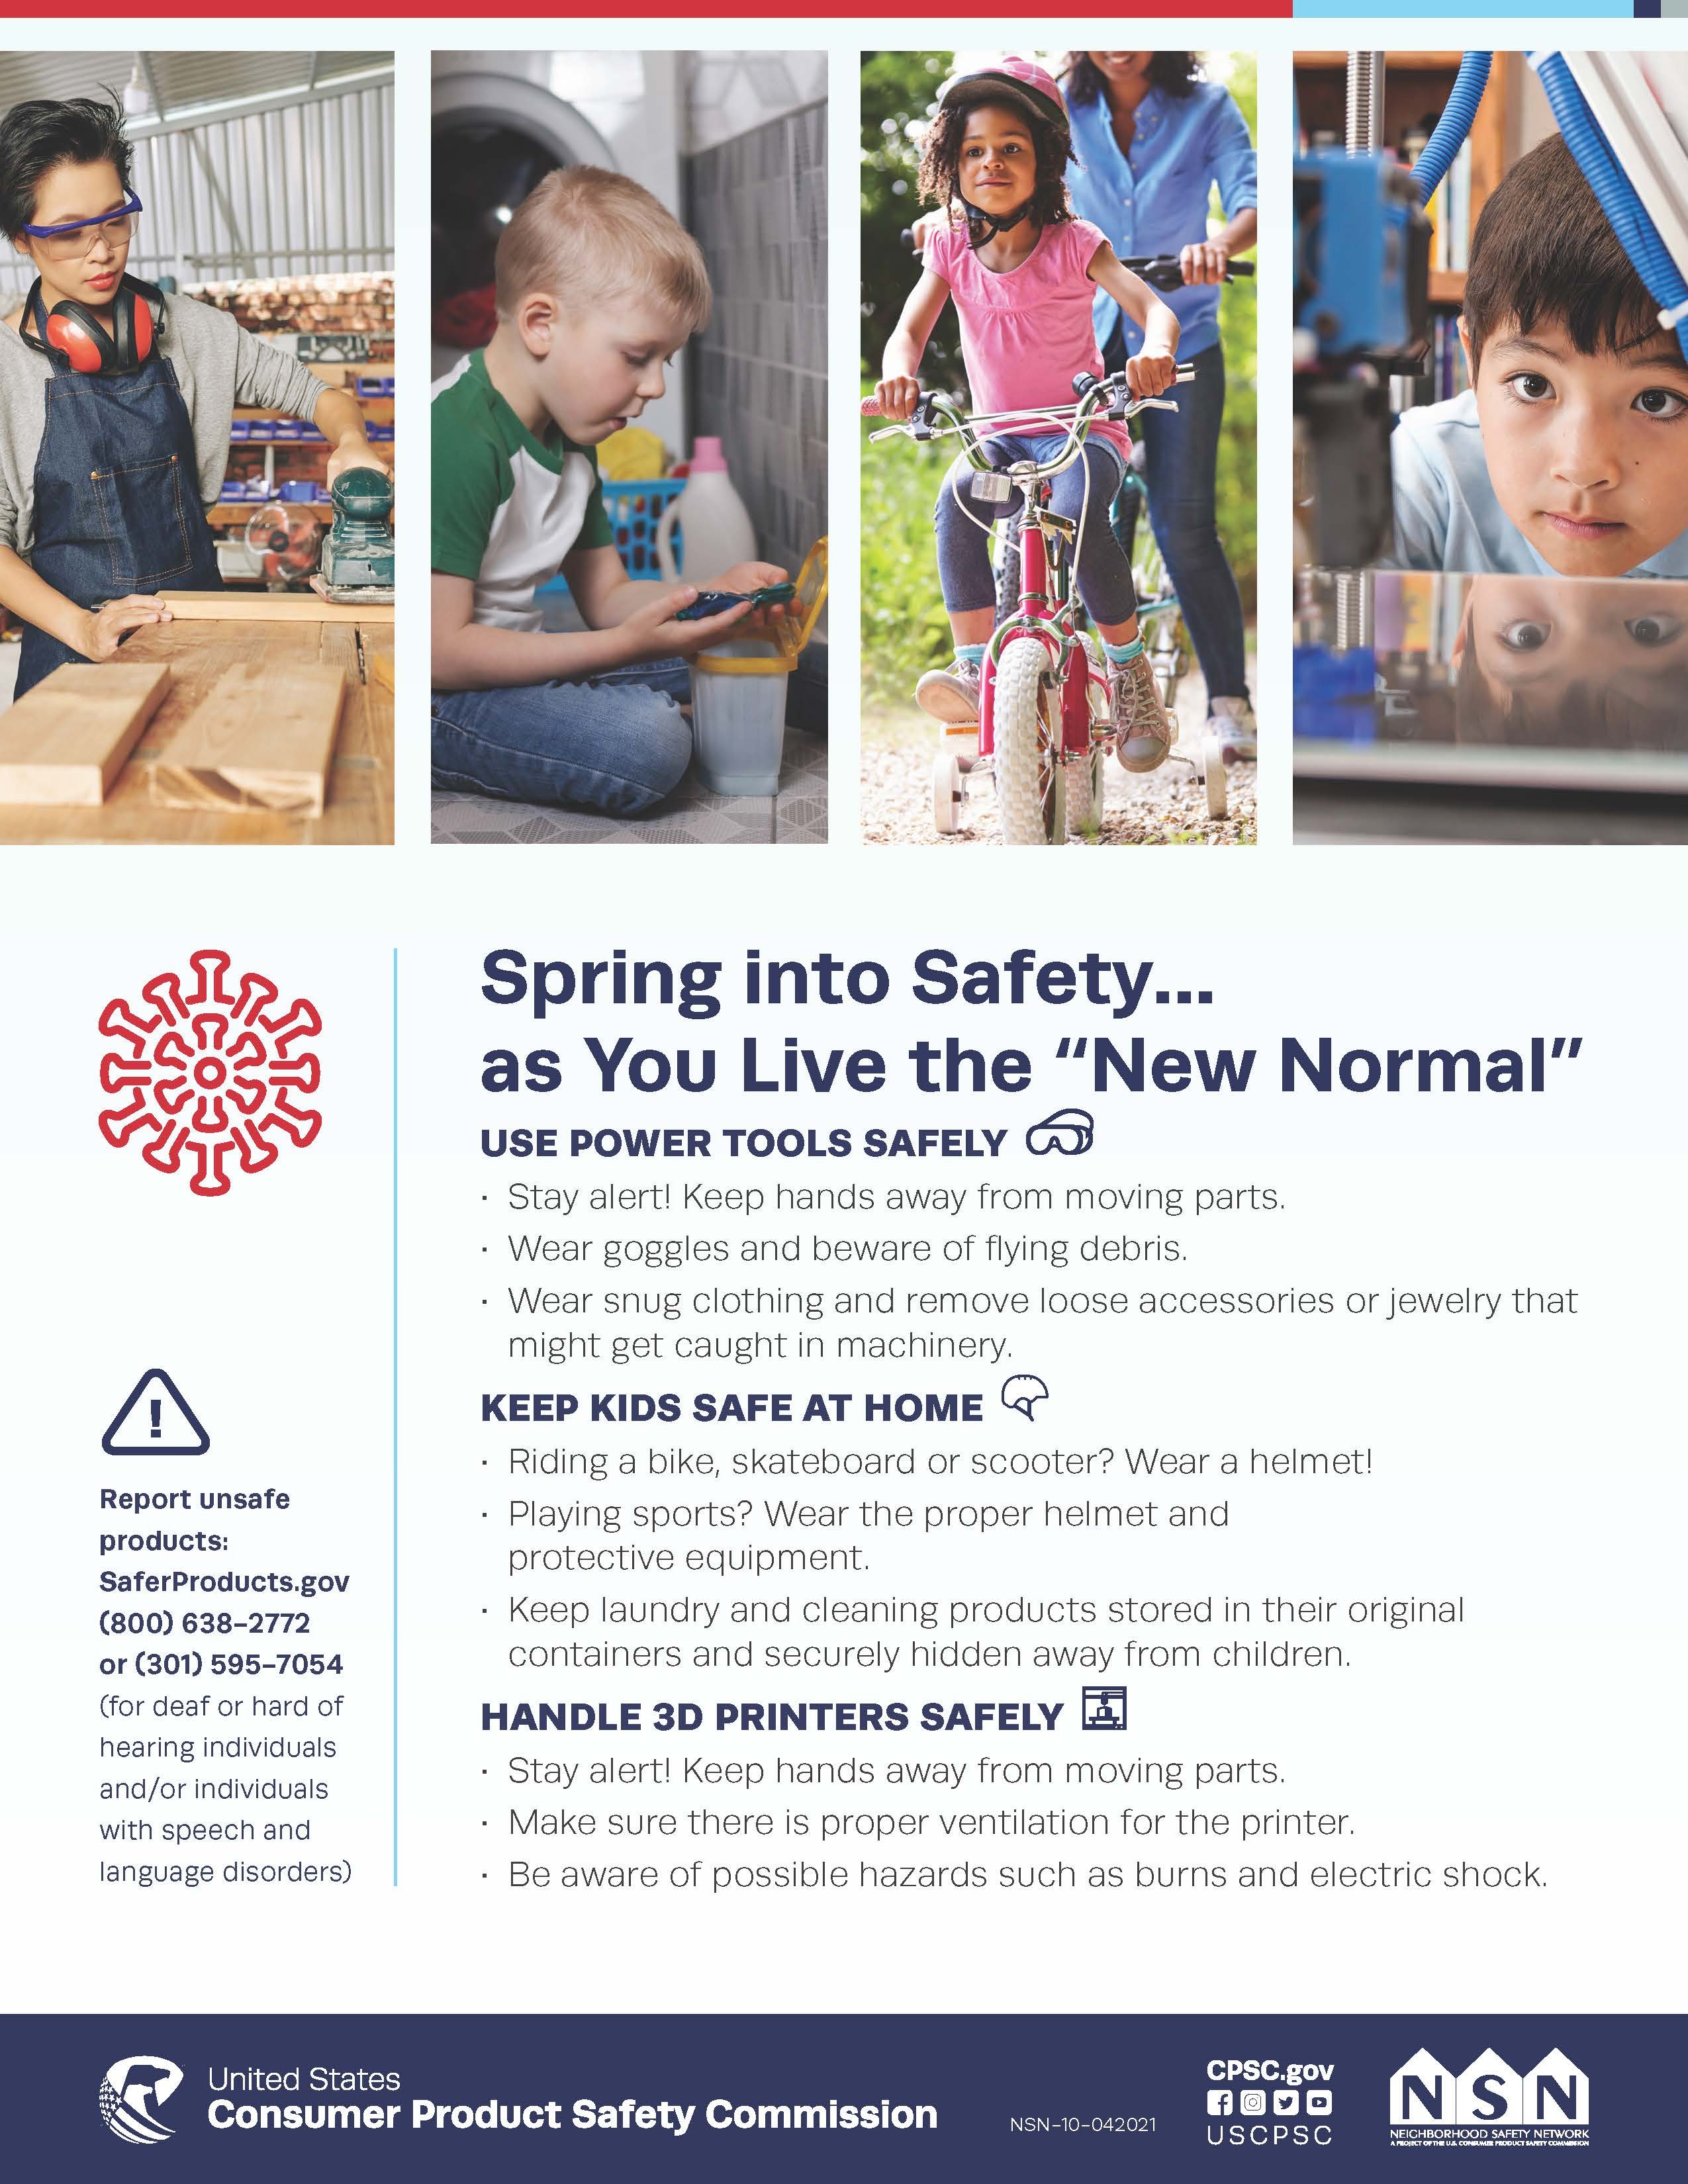 Spring Into Safety NSN Poster Image ?iWuDl2buij9ly7ZbAeZdp86p HKGhTv8